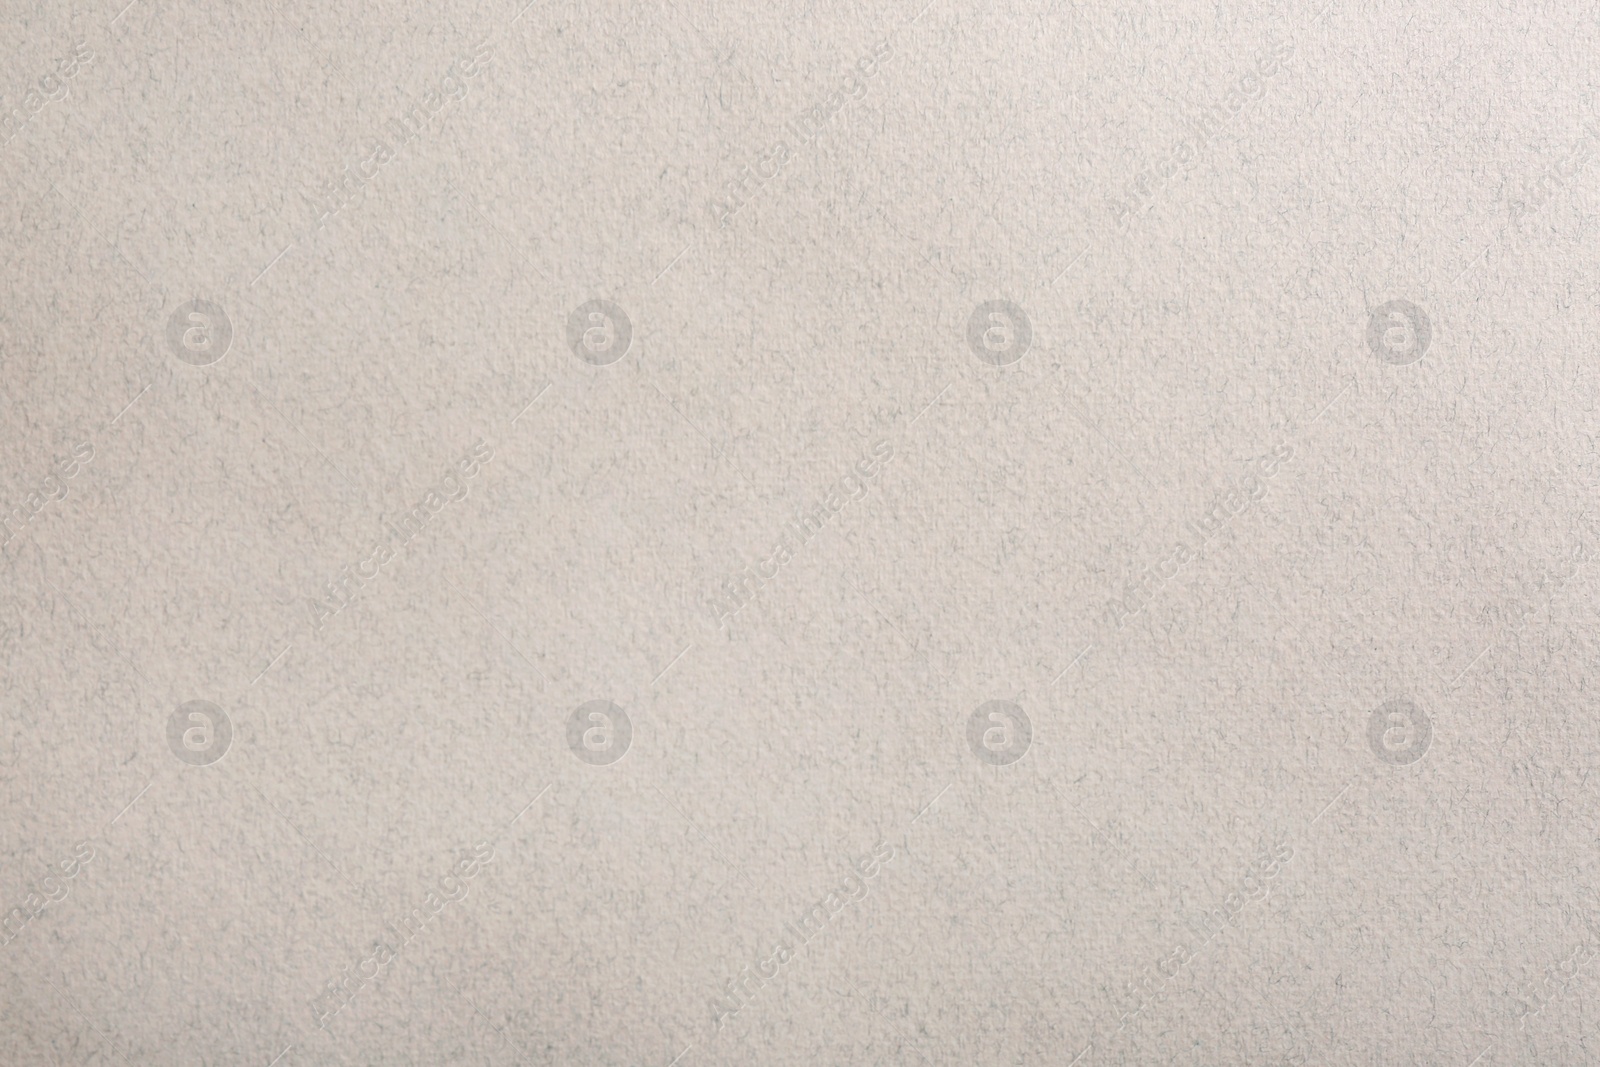 Photo of Recycled paper texture as background, top view